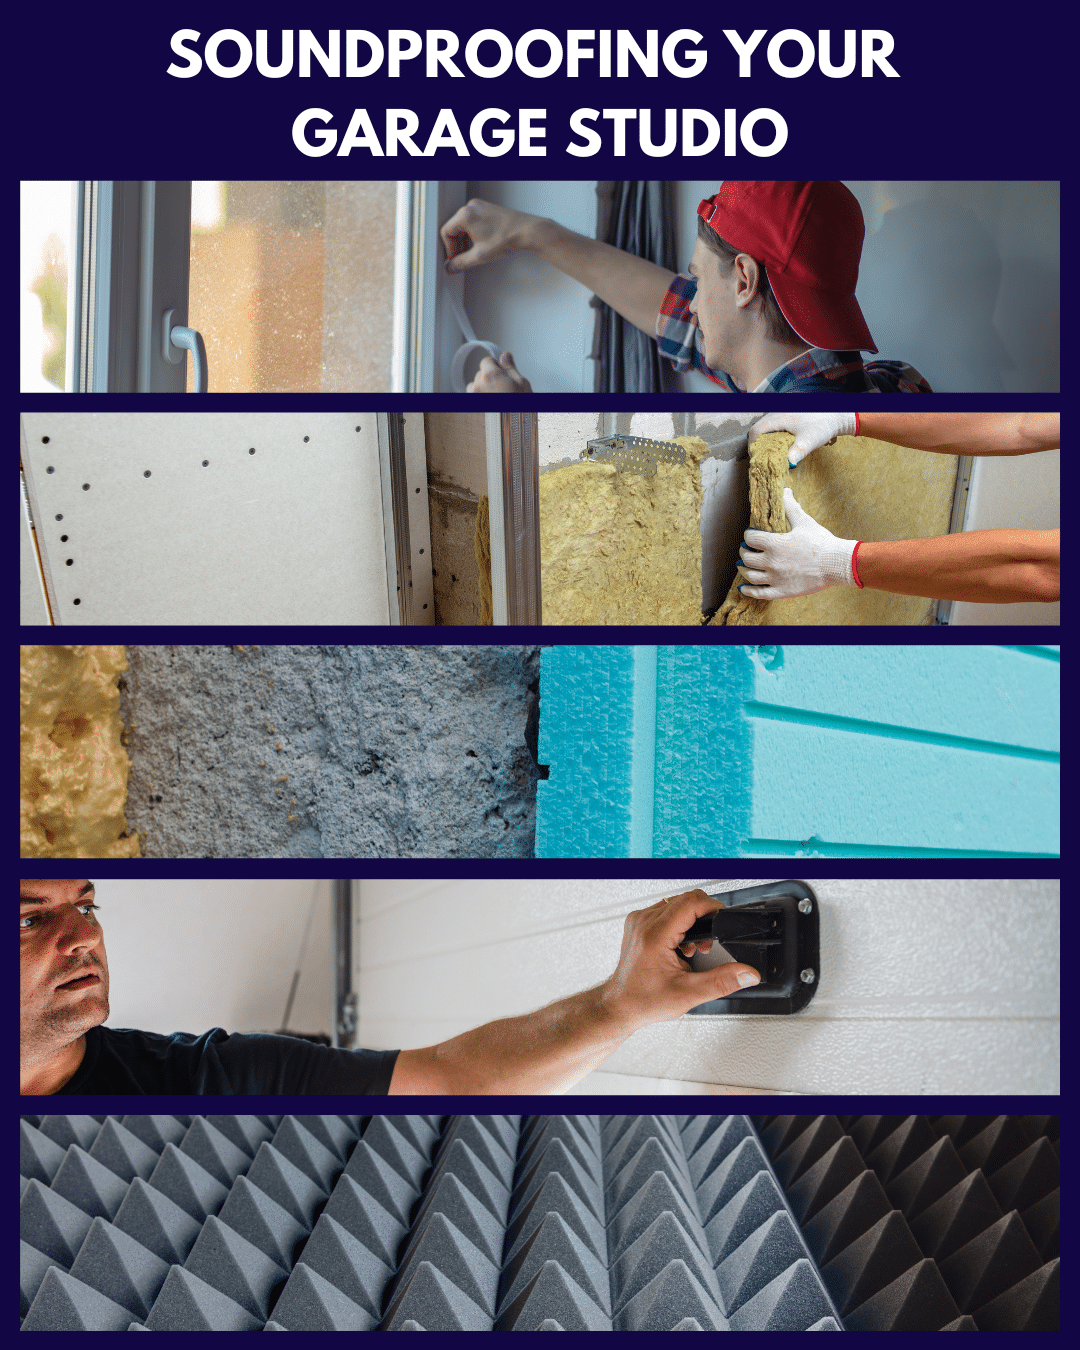 Collage of five images illustrating key steps in soundproofing a garage studio: 1) A man applying weather stripping to a window to seal sound leaks, 2) Insulation material being installed within a wall for sound absorption, 3) Additional layers of soundproofing material being added to a studio wall for enhanced noise reduction, 4) A man securely closing the garage door to ensure a sound-tight space, and 5) Various studio foam panels designed for wall installation to optimize acoustics and minimize external noise.